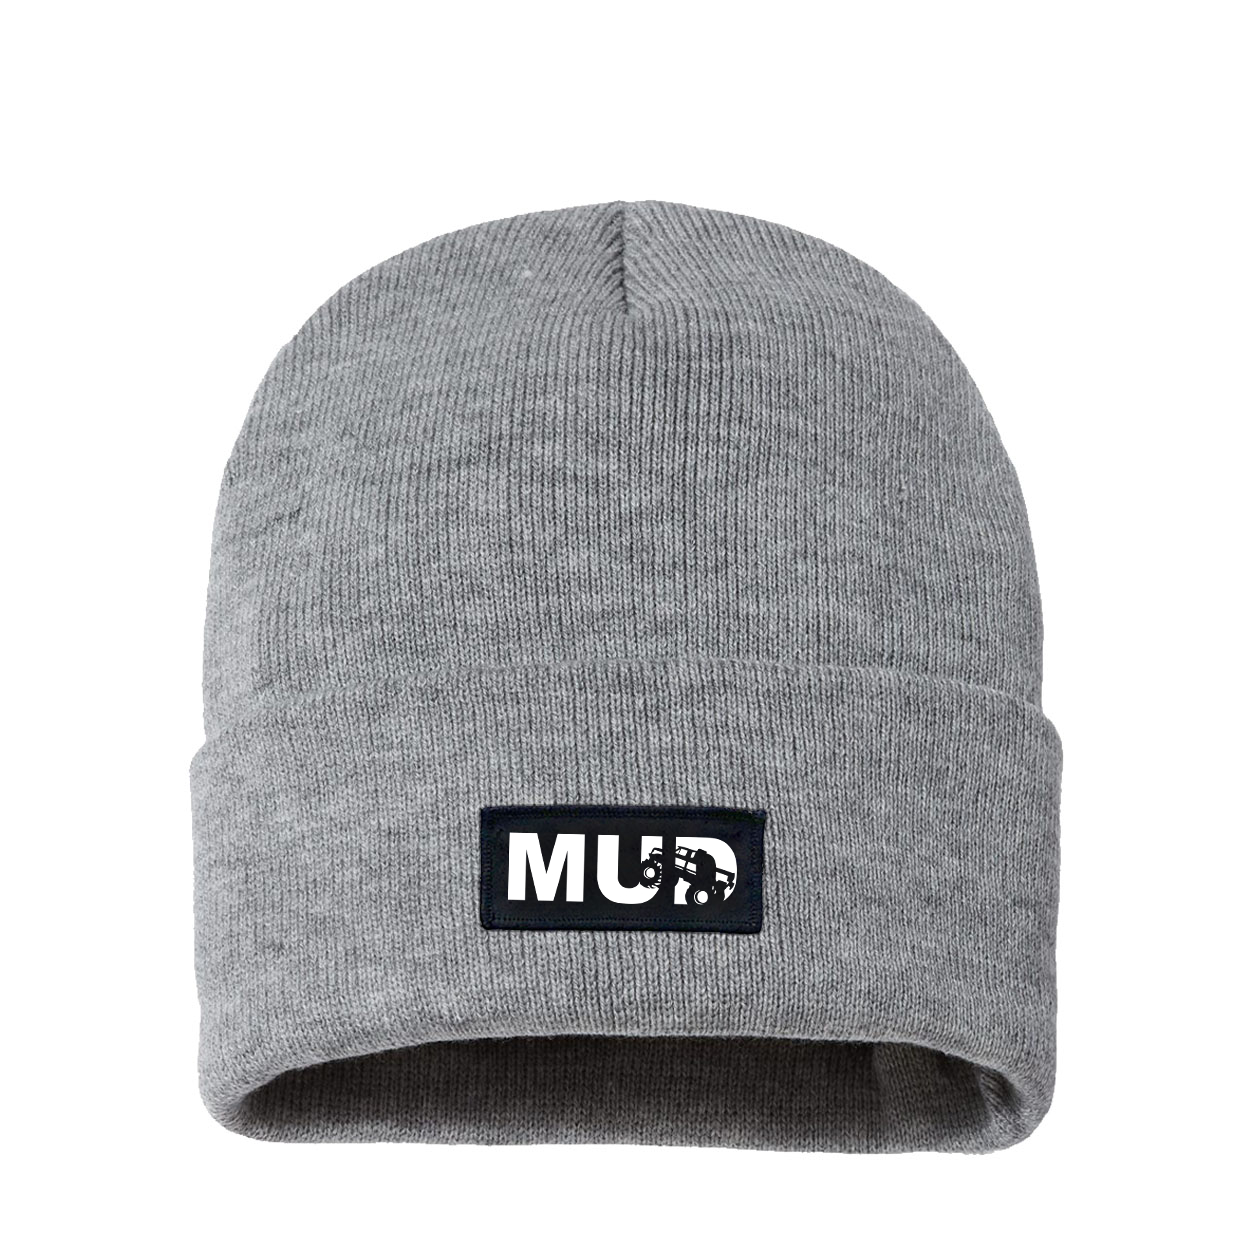 Mud Truck Logo Night Out Woven Patch Sherpa Lined Cuffed Beanie Heather Gray (White Logo)